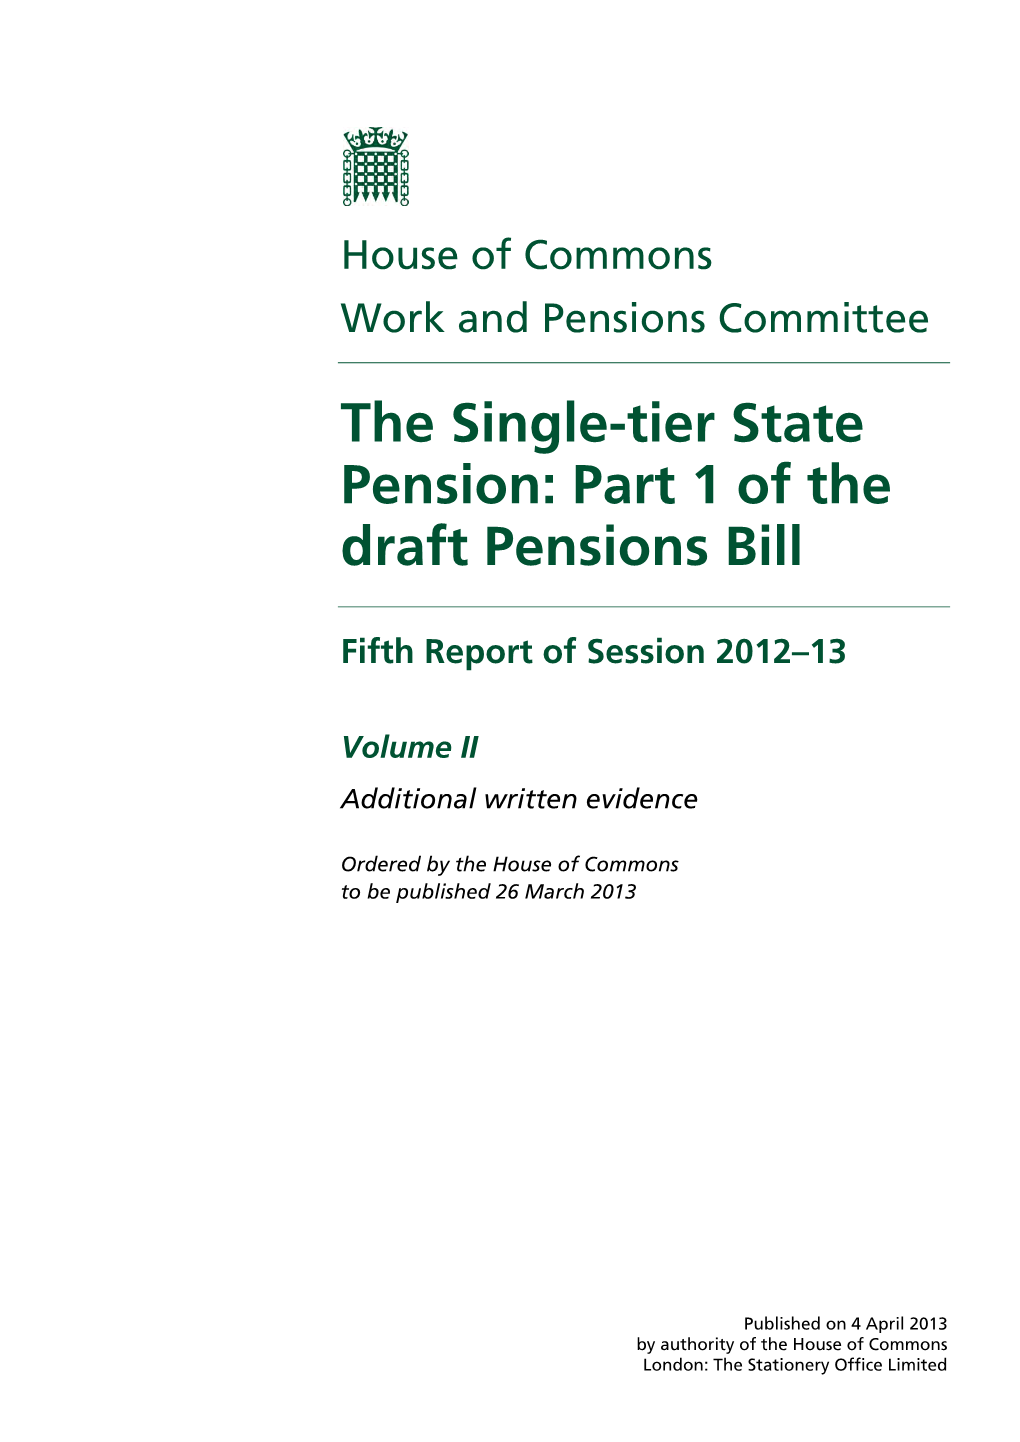 The Single-Tier State Pension: Part 1 of the Draft Pensions Bill